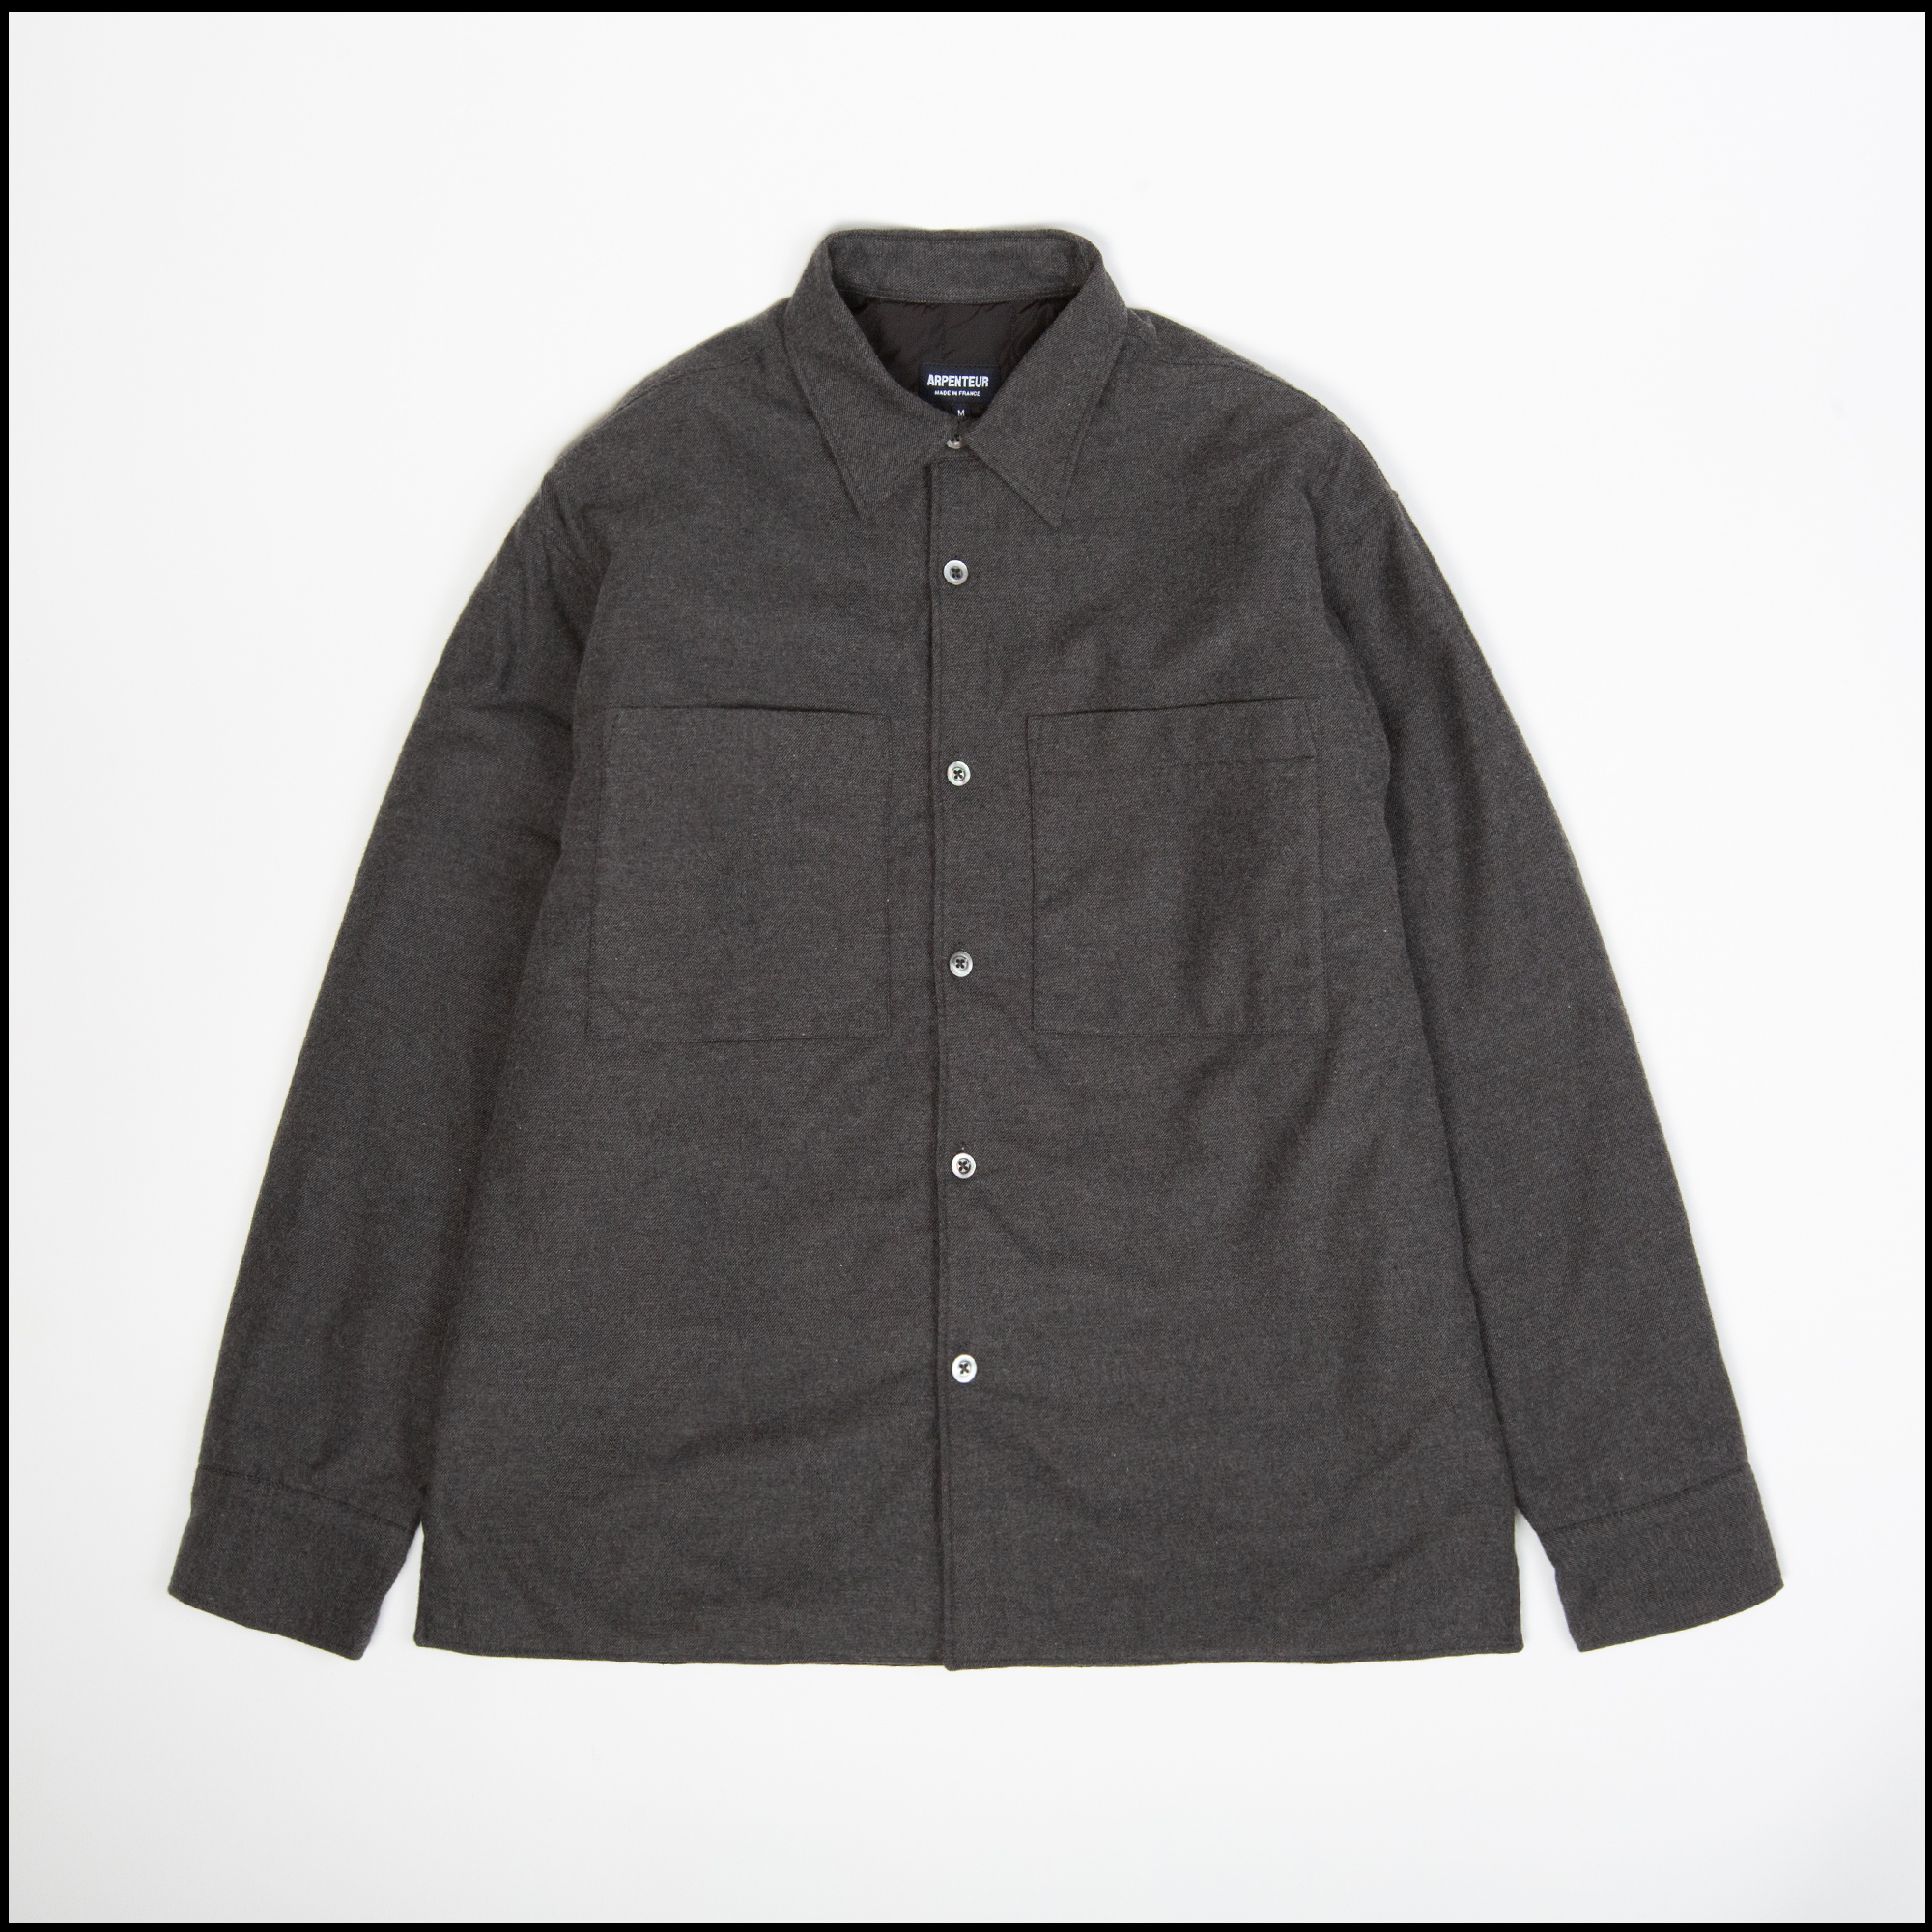 TWIN shirt in Charcoal color by Arpenteur